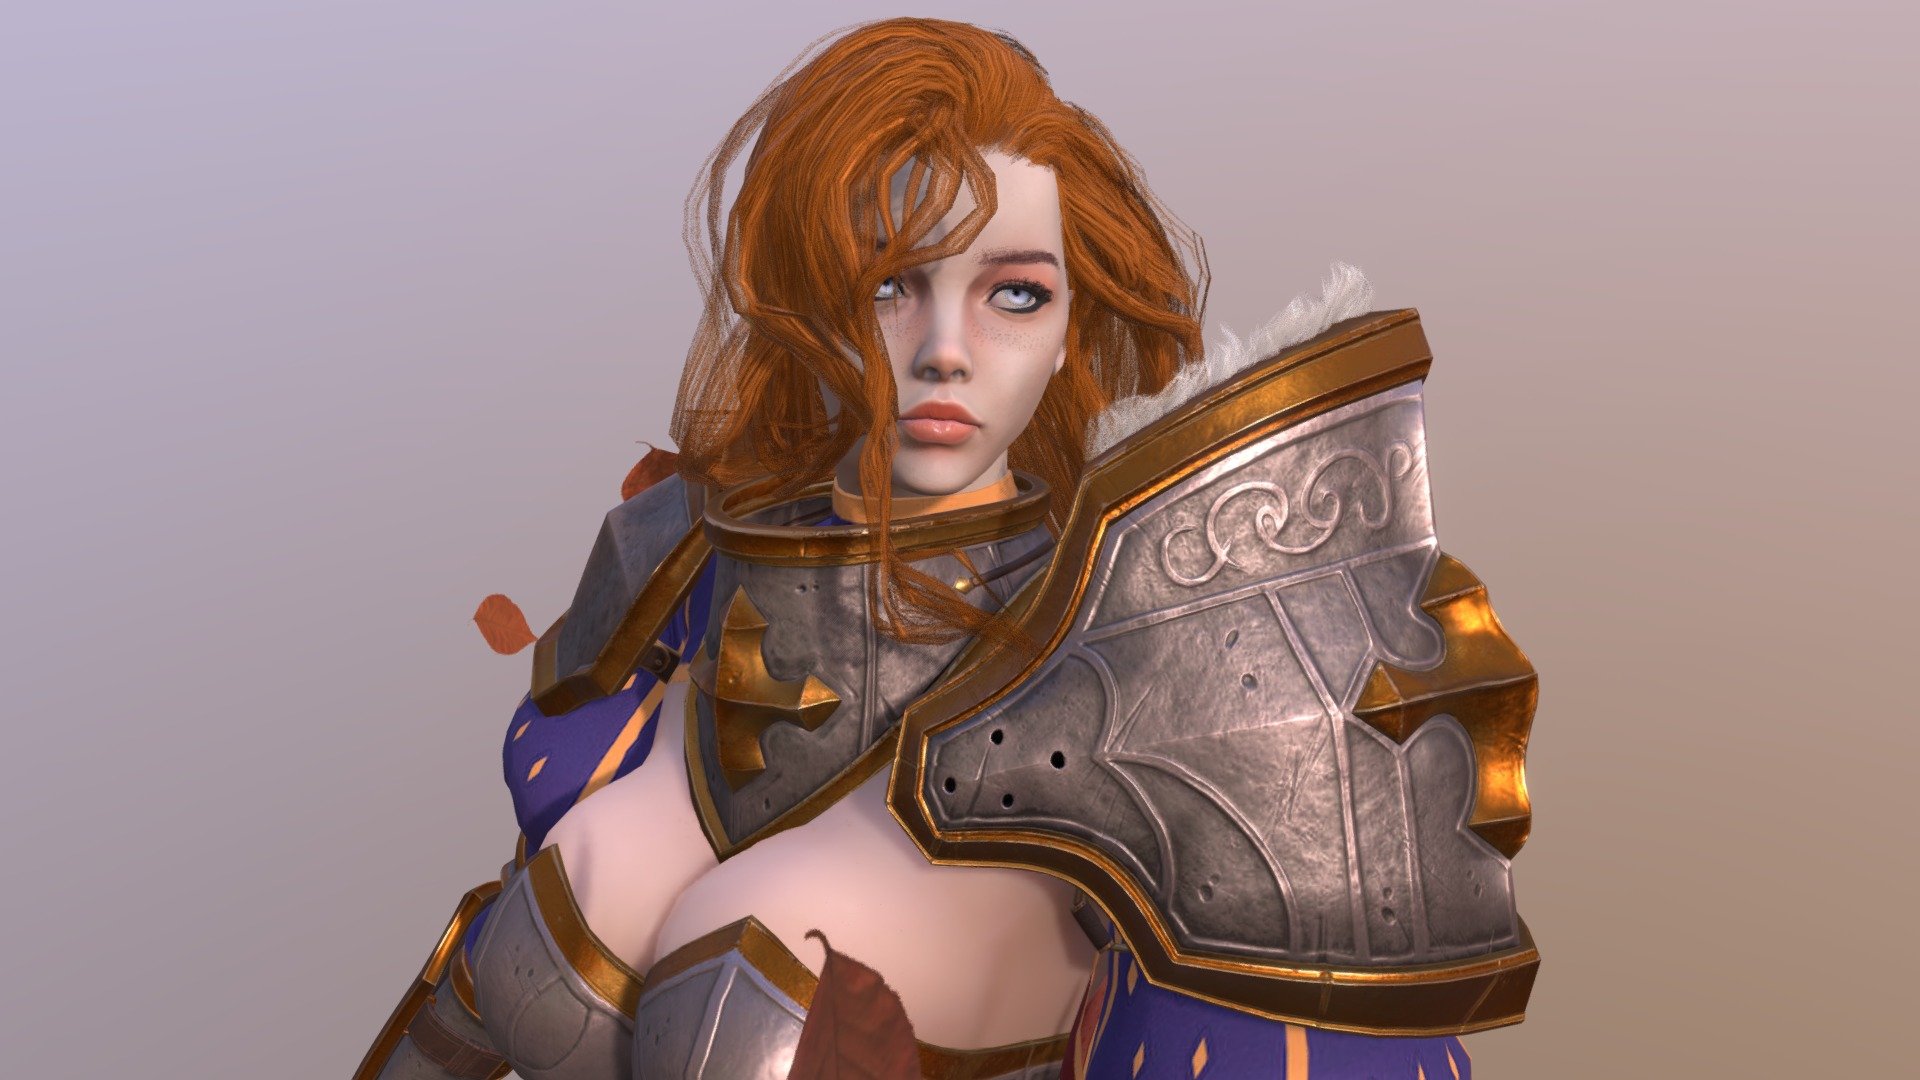 Modeling Personal Project
Concept by Kim-Sung-Hwan
https://www.artstation.com/artwork/ykyW9n - Paladin - 3D model by IL3D (@il3dcr) 3d model